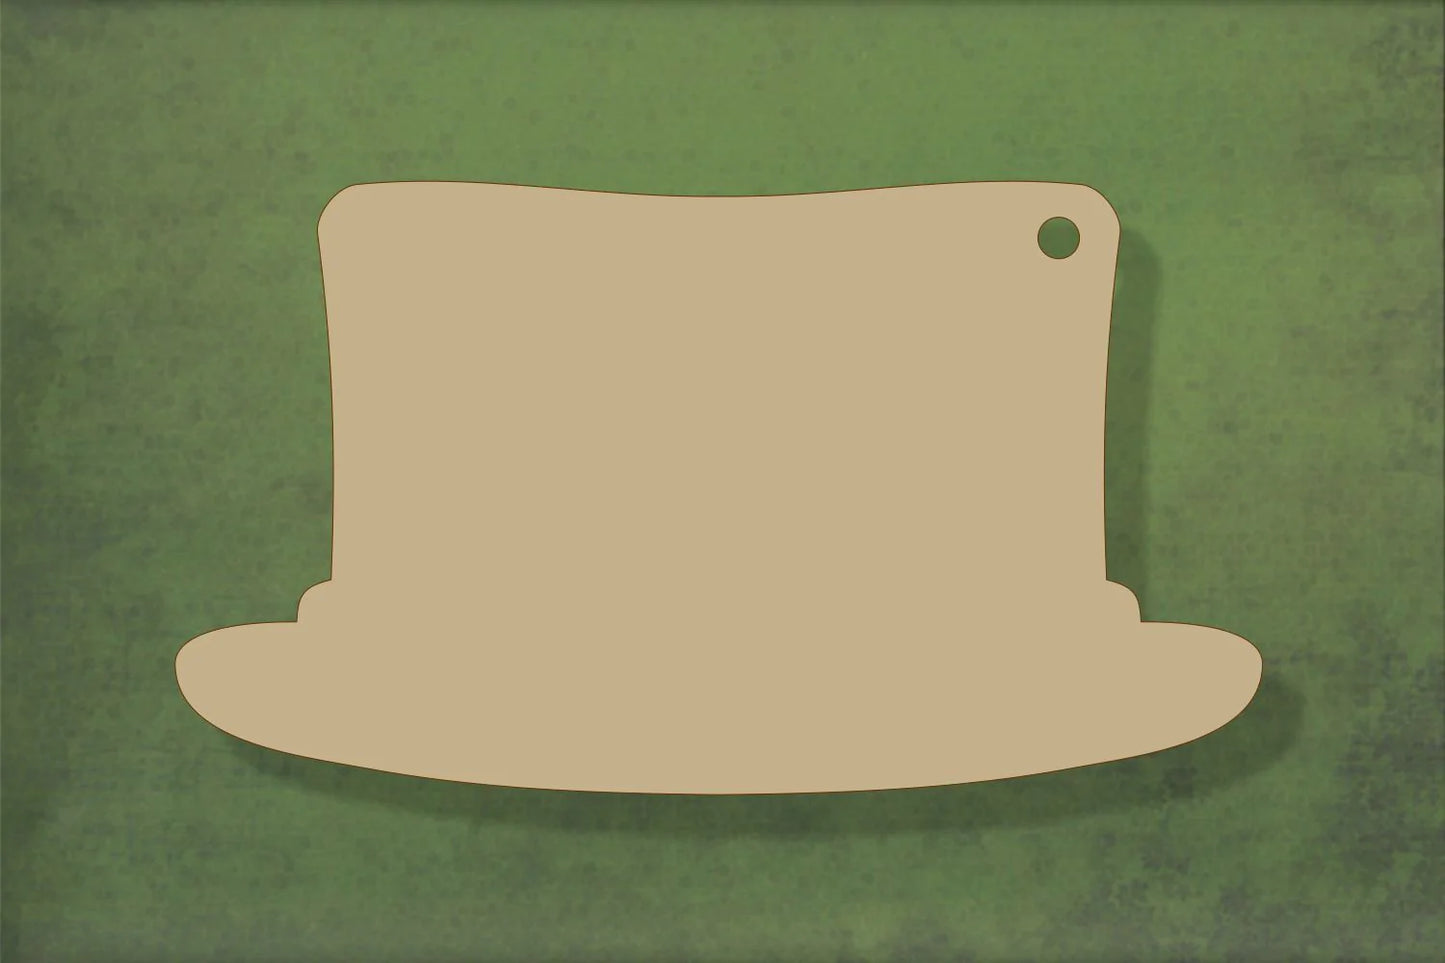 laser cut blank wooden Top hat shape for craft